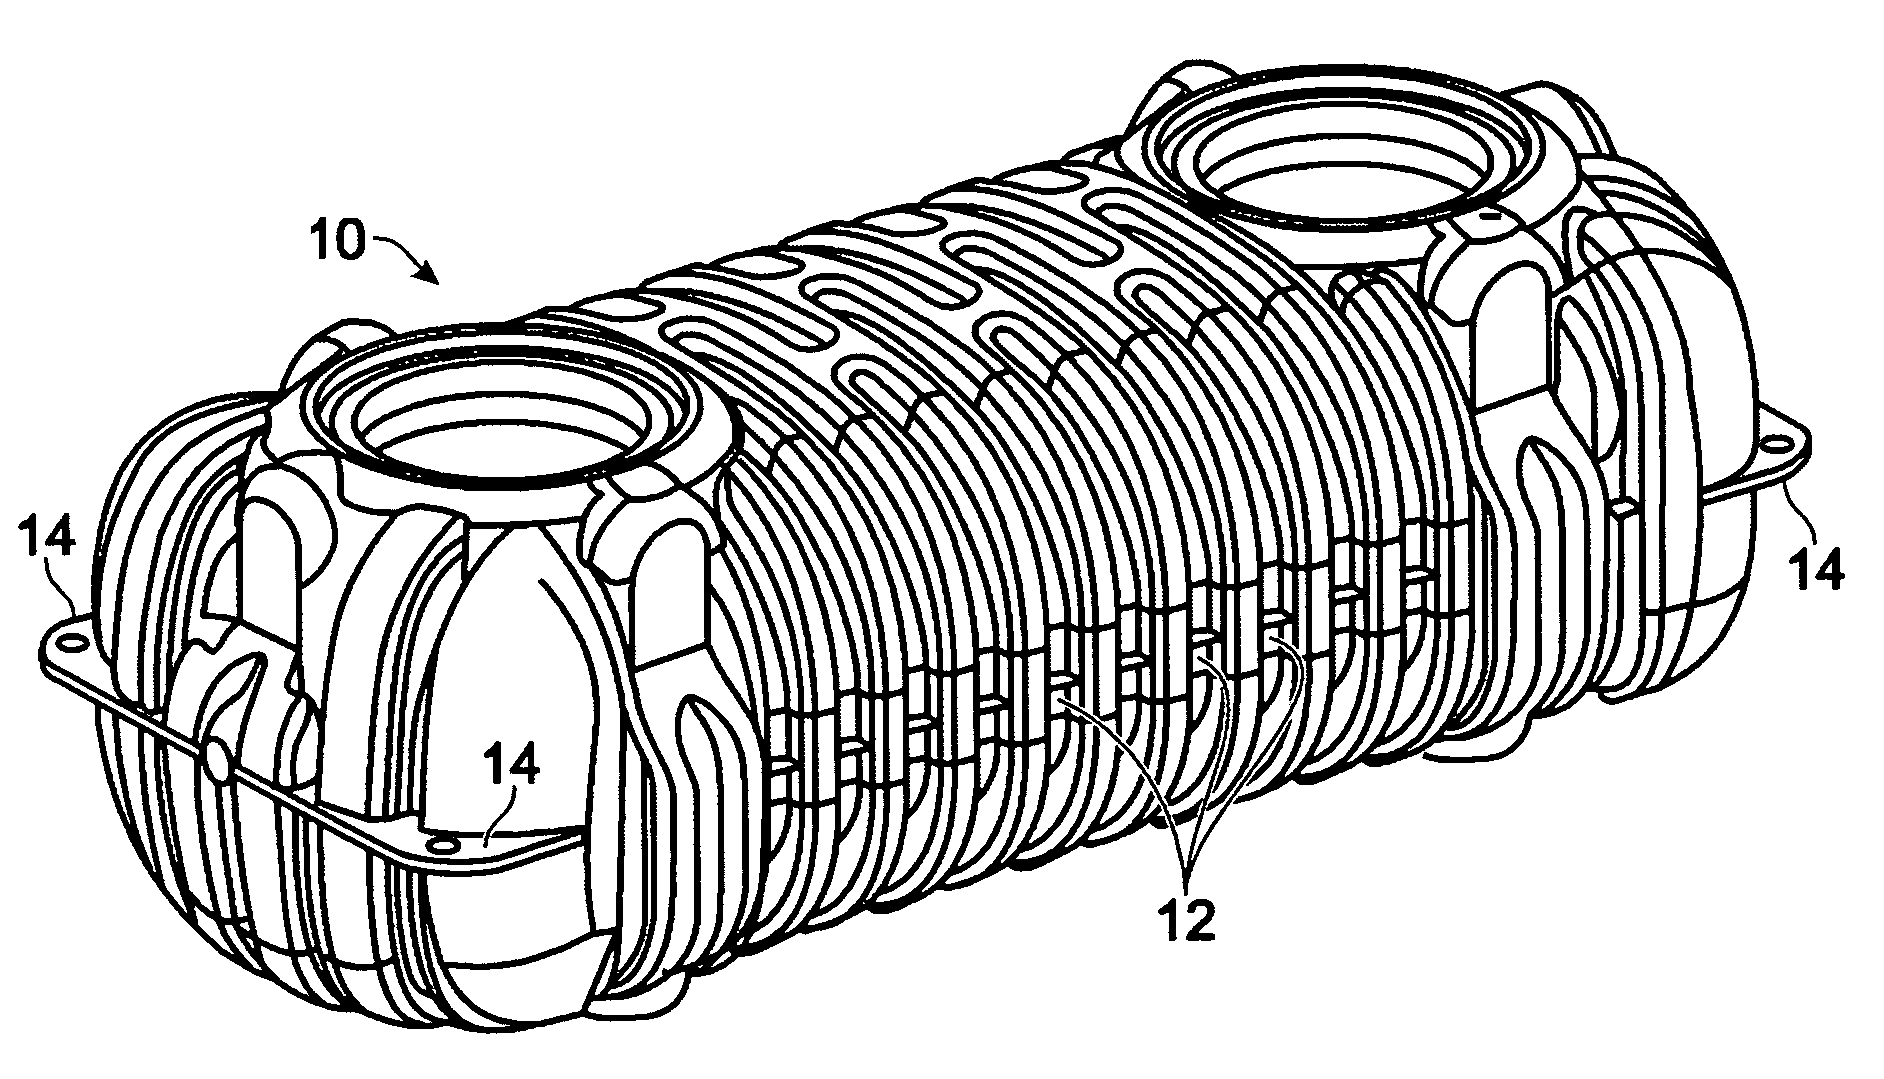 Blow molded septic tank and method of manufacture